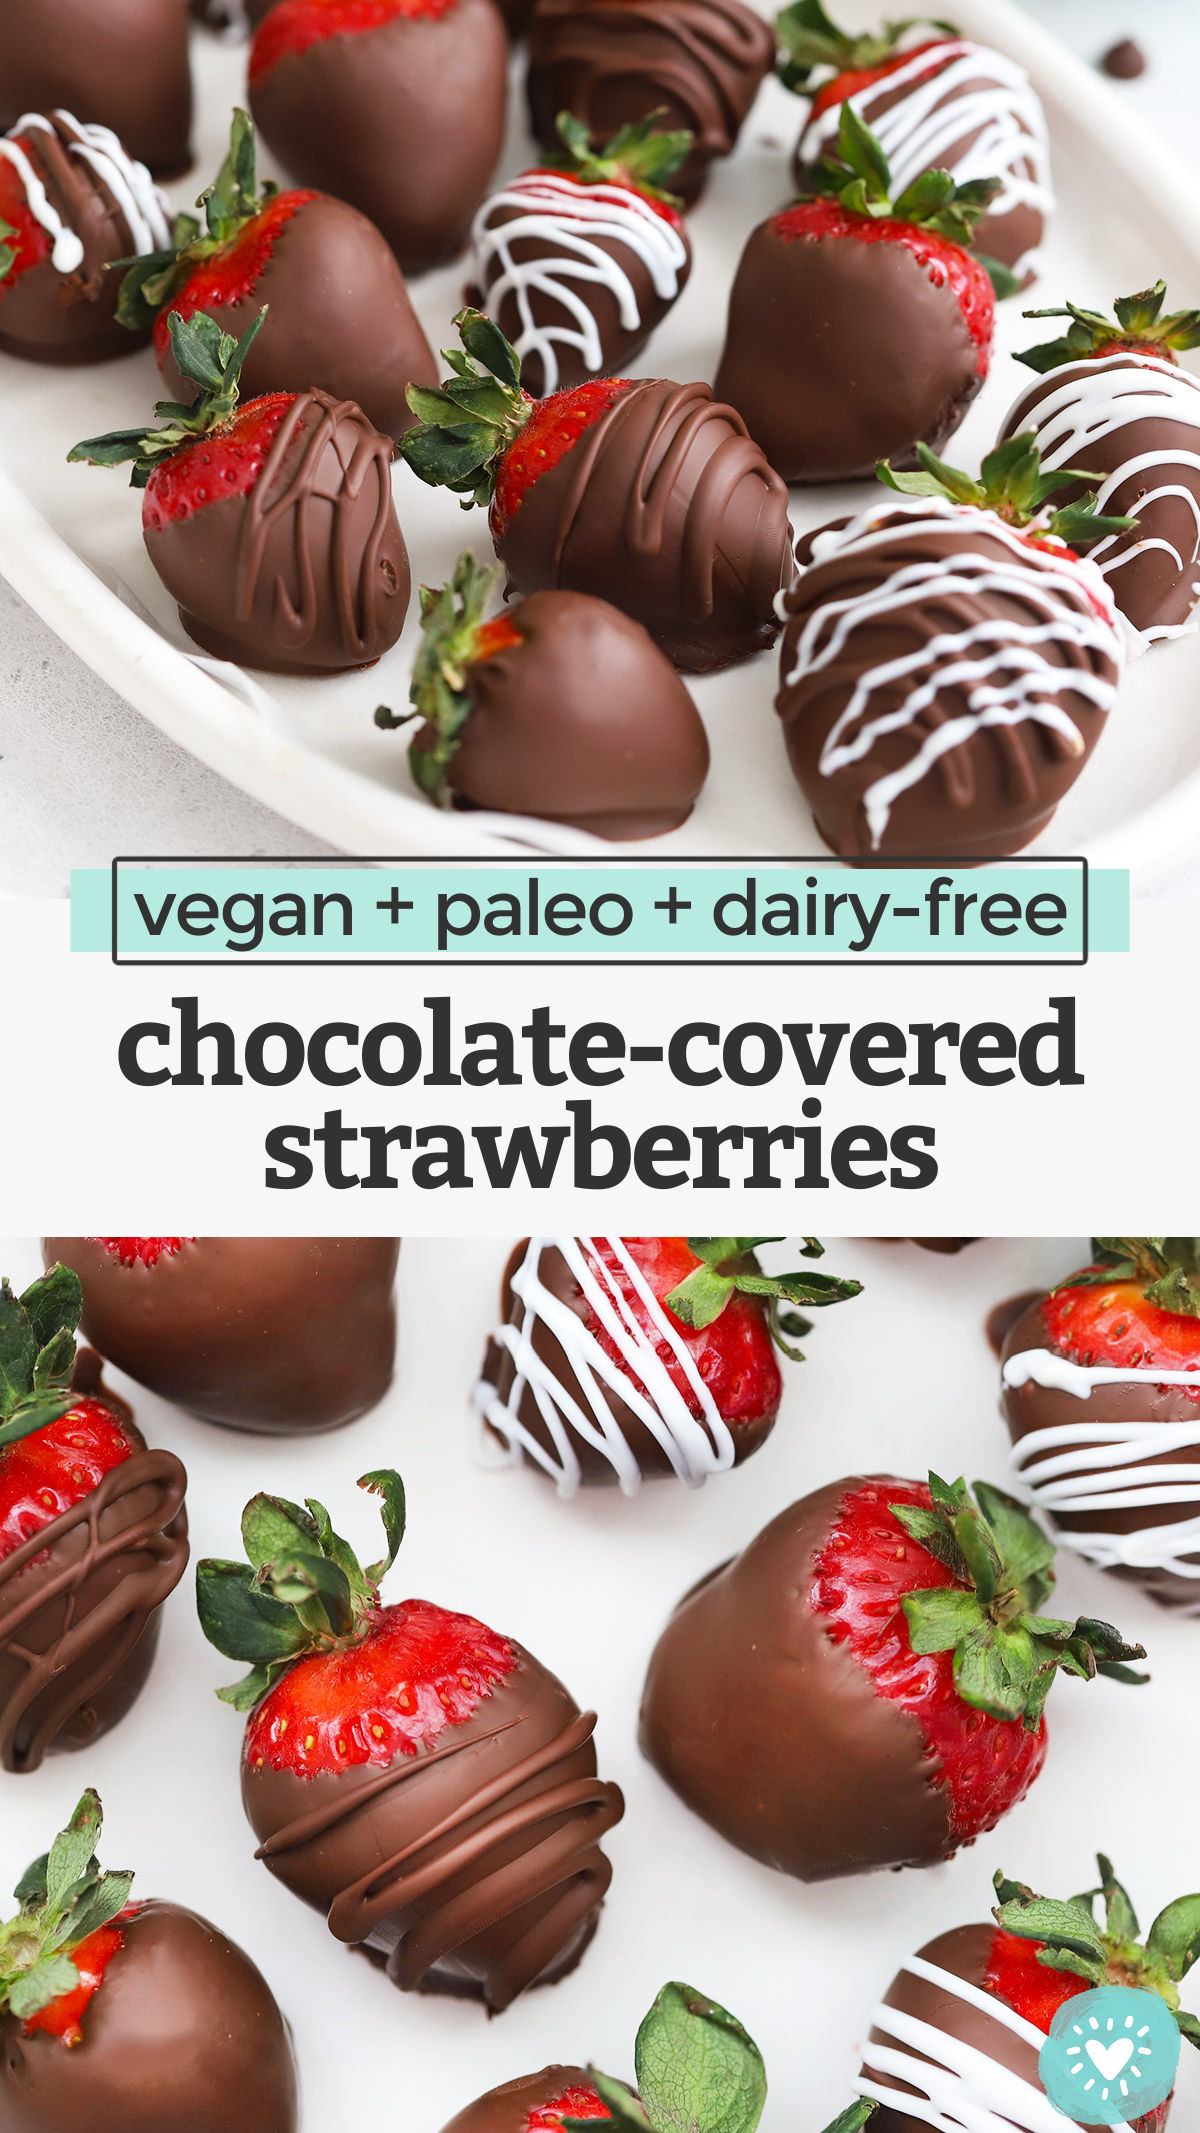 How to Make Chocolate Covered Strawberries - Here is everything you need to know to make this classic dessert! I'll even show you how to make them dairy-free, vegan, and paleo-approved! // Paleo Chocolate covered strawberries // dairy-free chocolate-covered strawberries // vegan chocolate covered strawberries // valentines day dessert #glutenfree #paleo #vegan #dairyfree #chocolatecoveredstrawberries